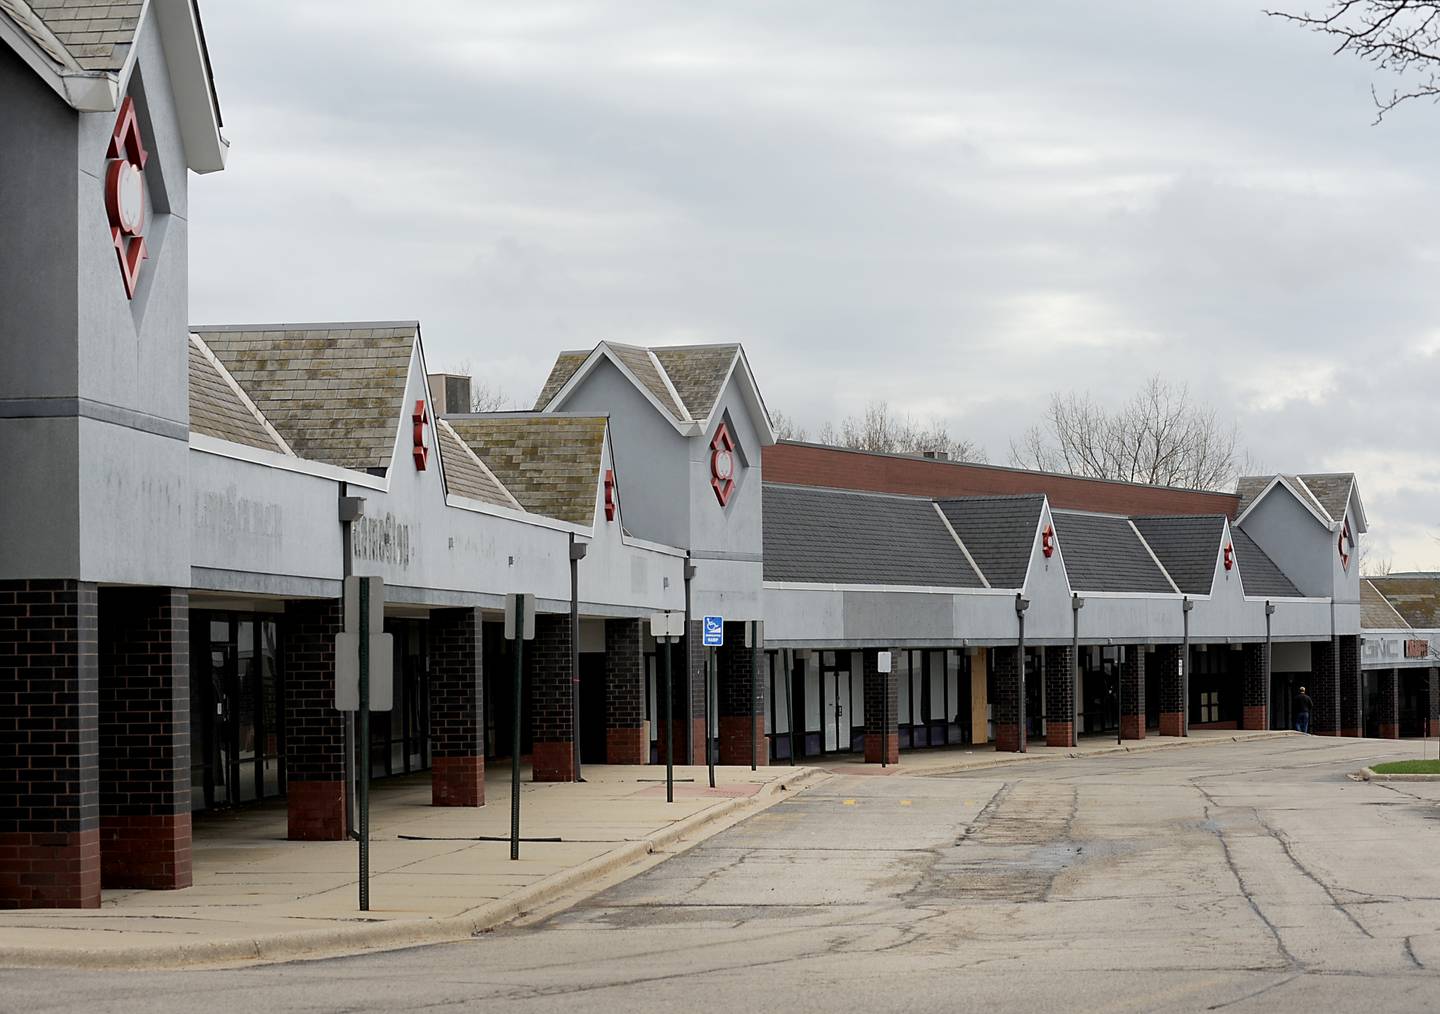 The Crystal Court shopping center at 6000 Northwest Highway in Crystal Lake is photographed on Wednesday, April 13, 2022.